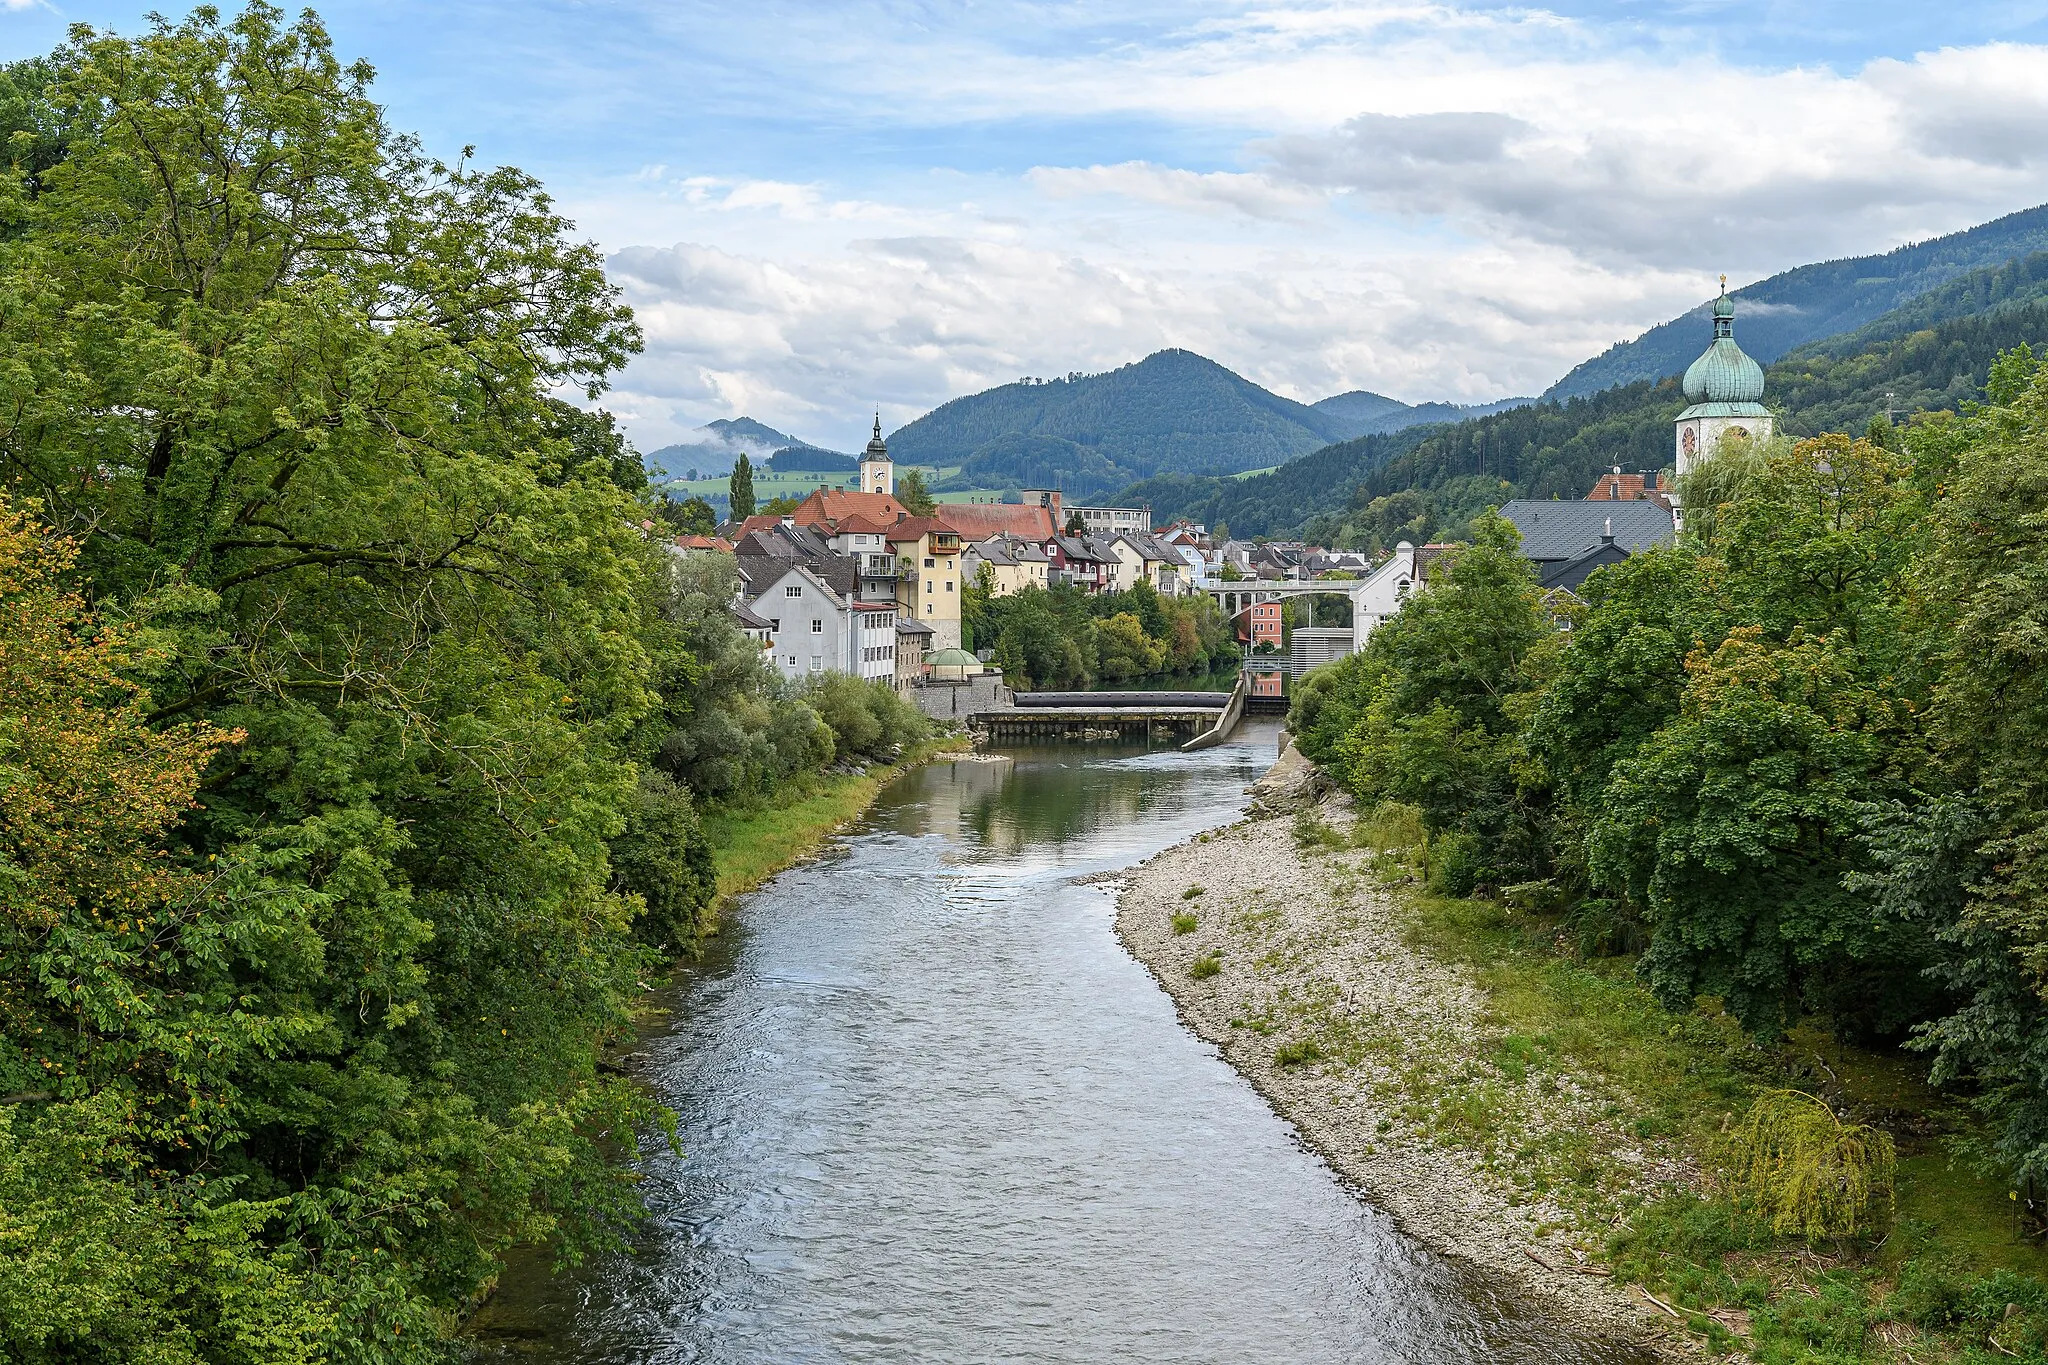 Photo showing: From the castle footbridge in Waidhofen an der Ybbs, you can see part of the old town and the Winterwehr power station with the inflatable rubber dam.